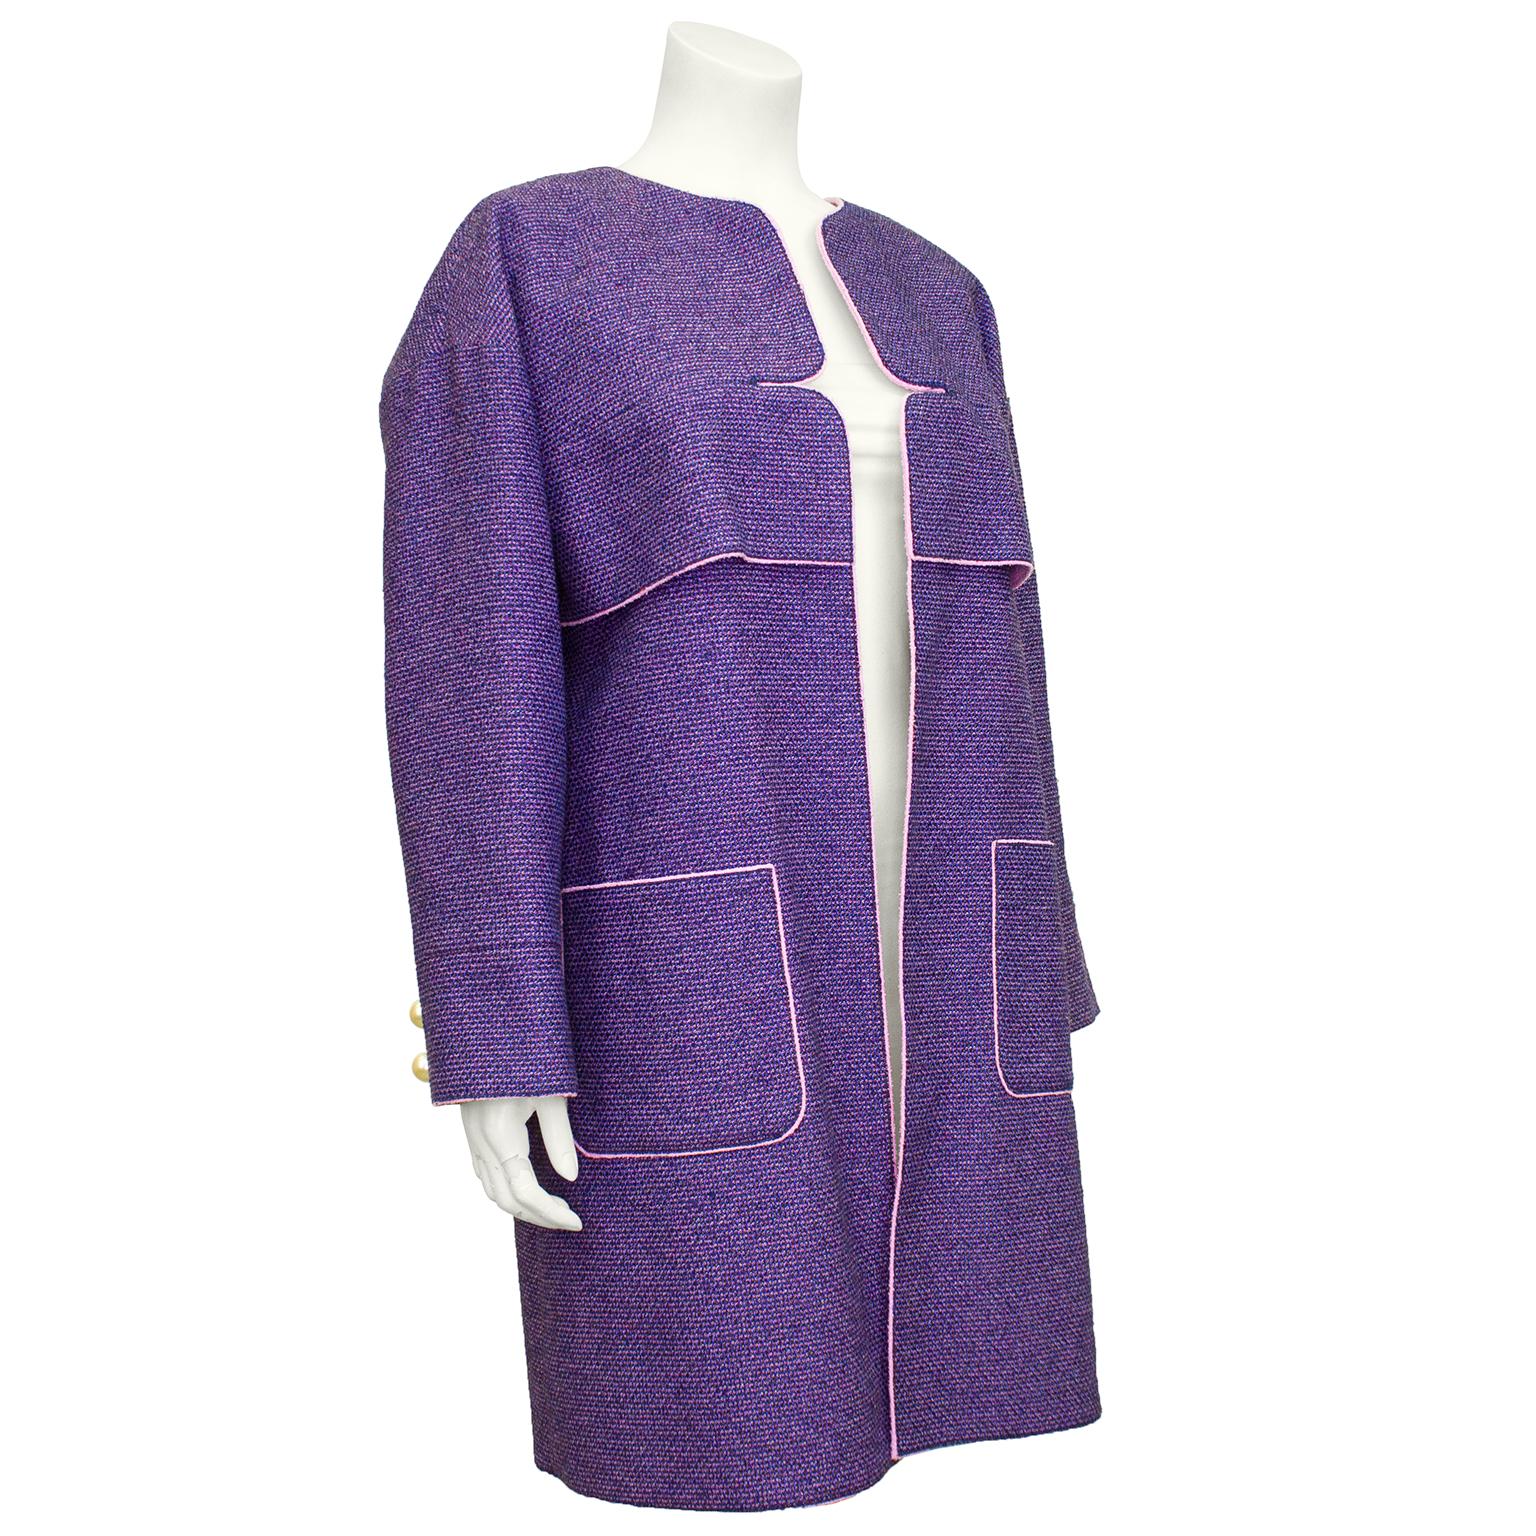 Stunning purple and pink tweed coat from the Chanel Spring 2013 collection. Collarless and open front with a vent detail at bust and two large patch pockets at hips. Dropped shoulder and large faux pearl buttons at cuffs. Interior is the perfect